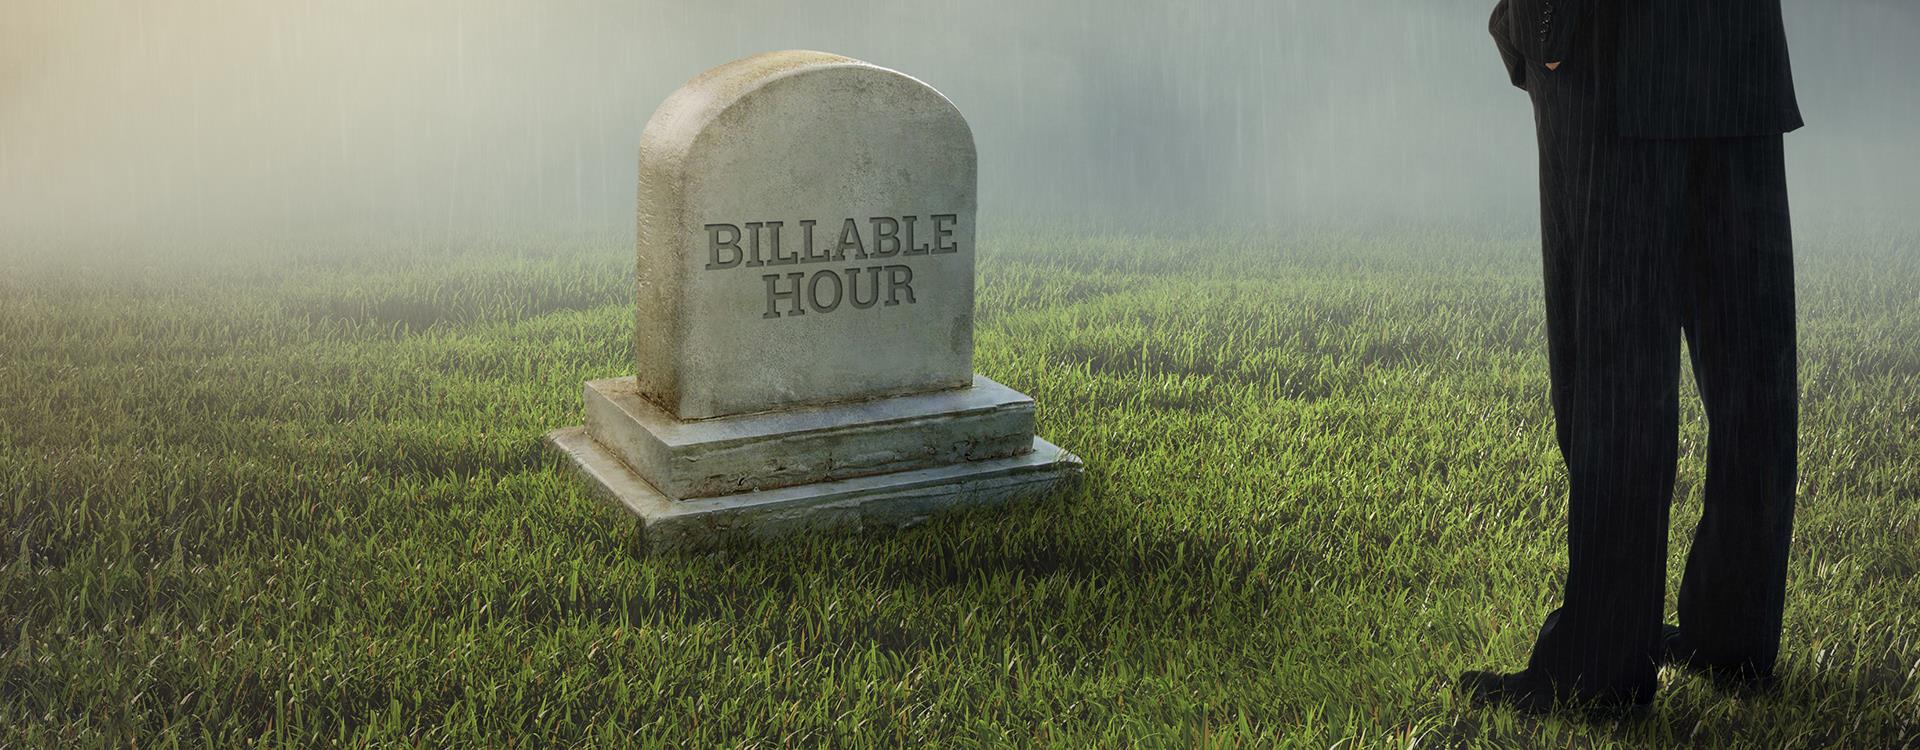 The Death of the Billable Hour